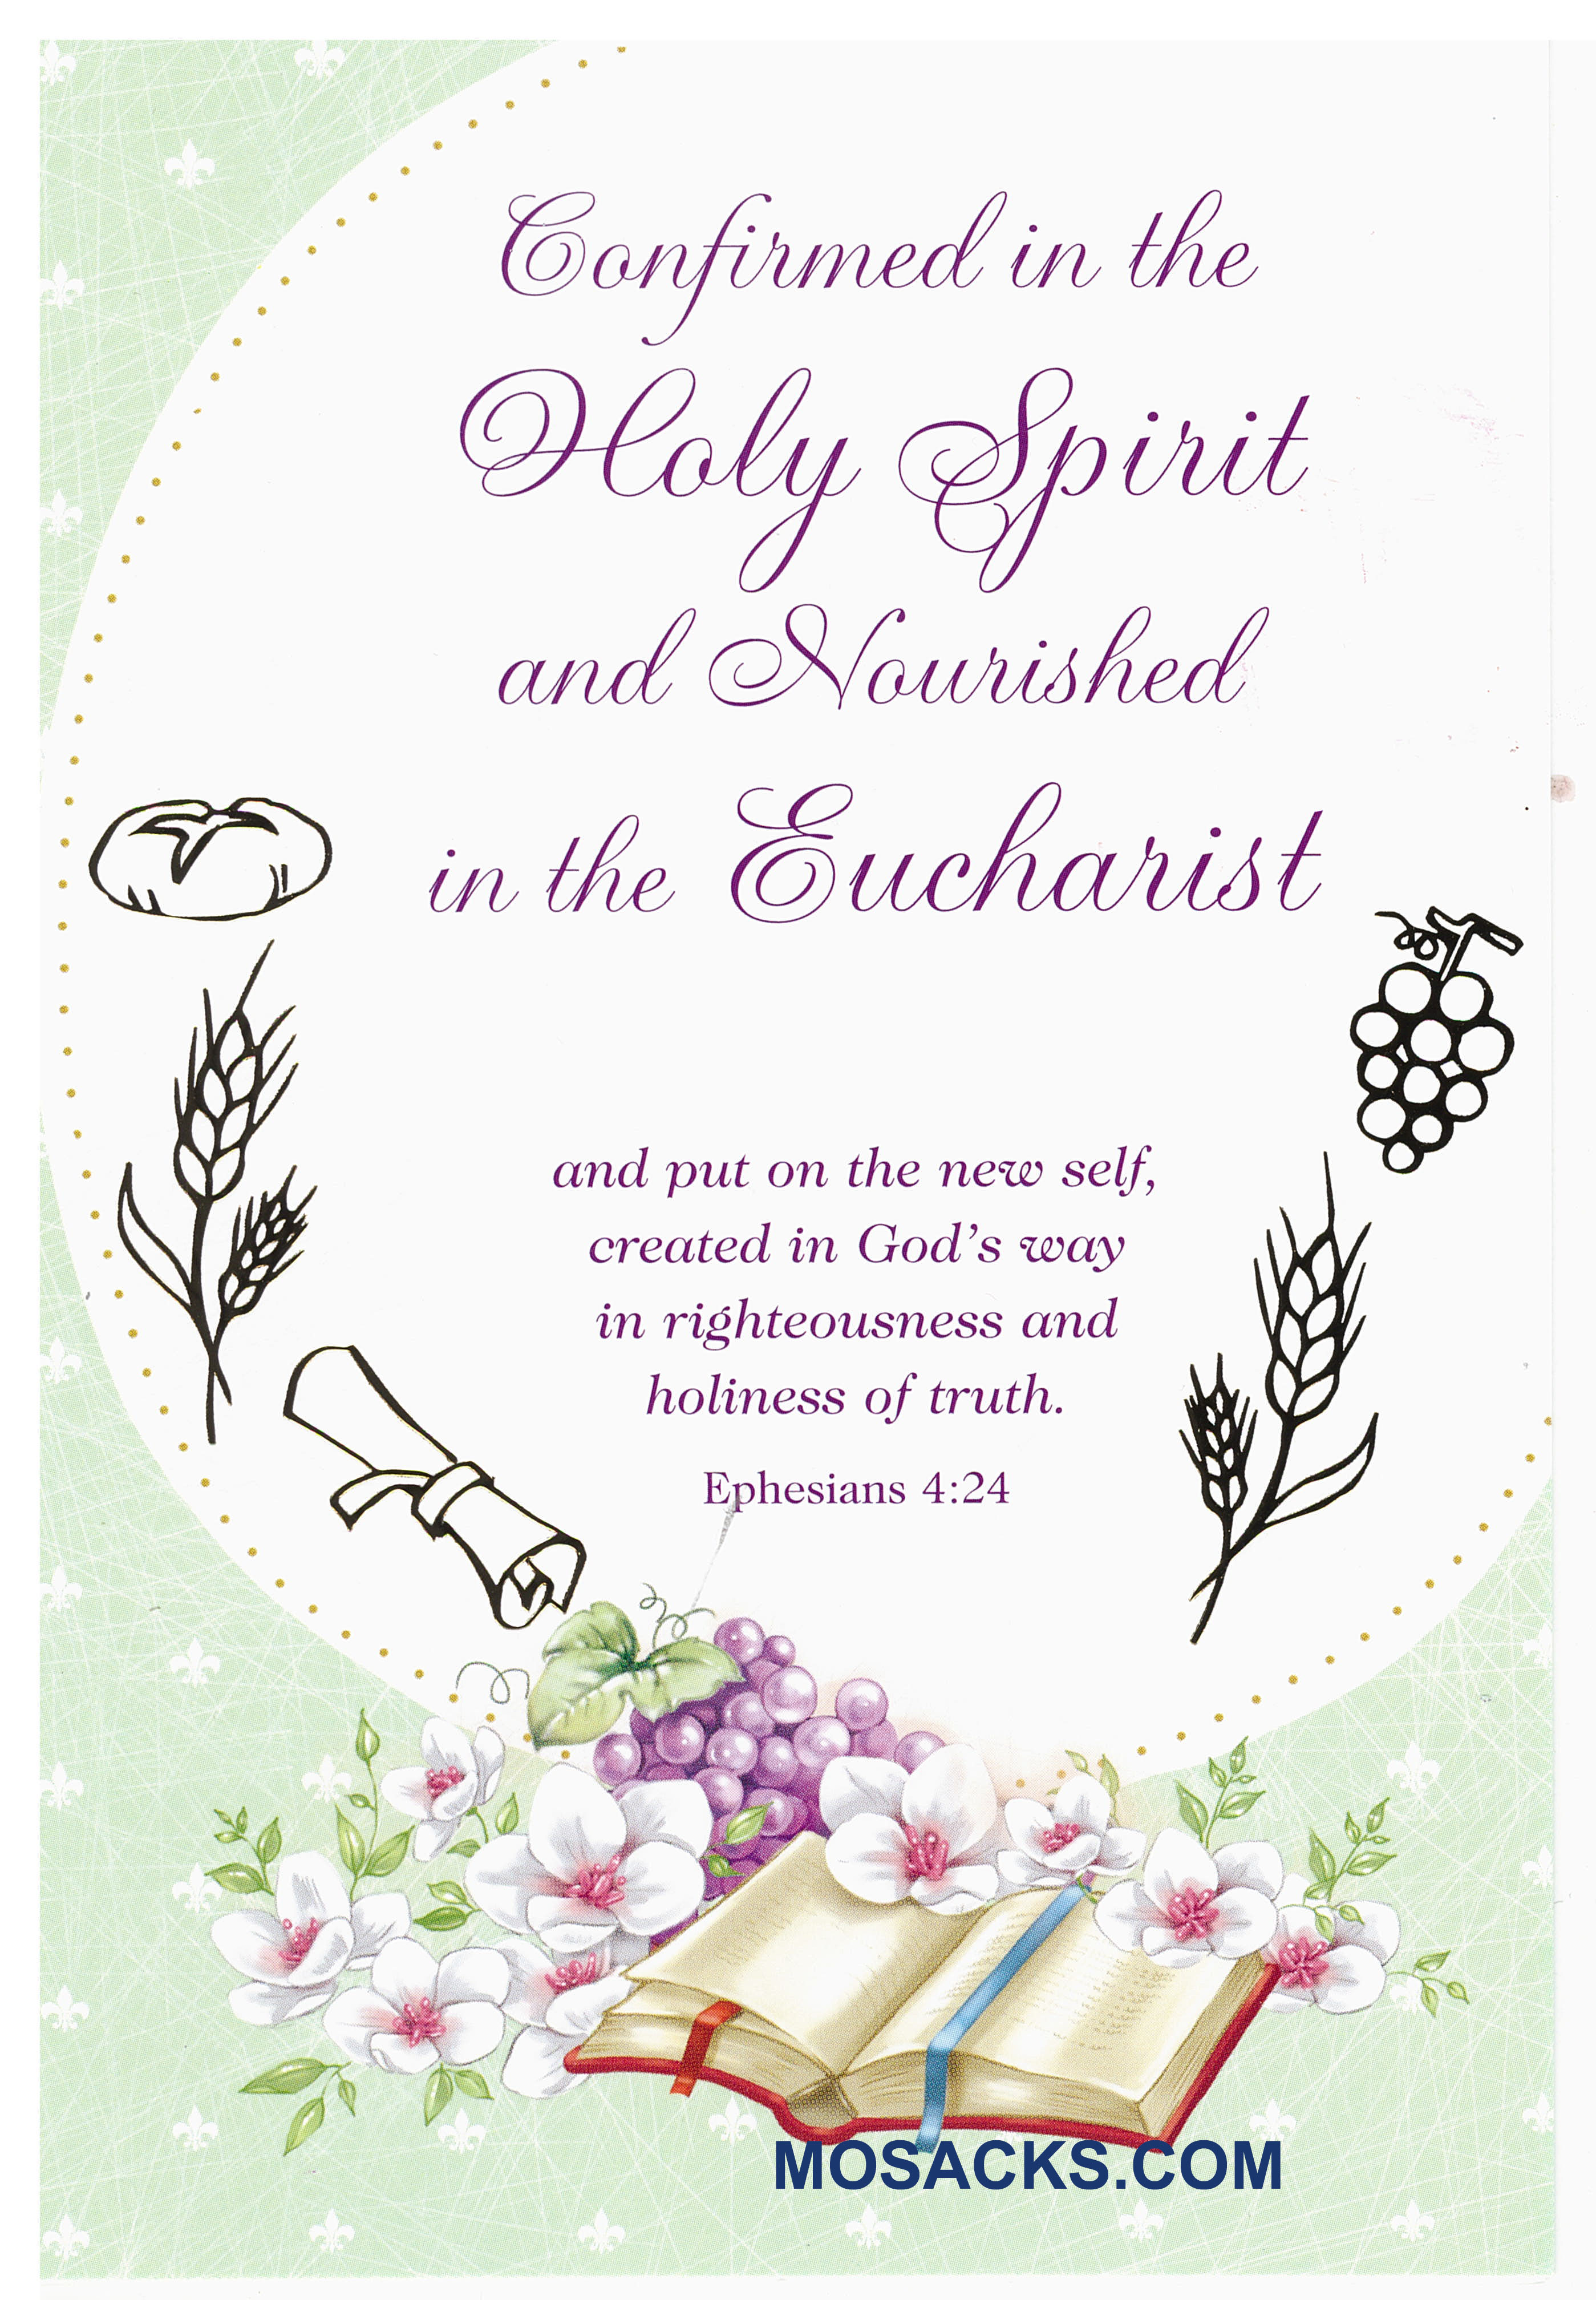 Confirmed in the Holy Spirit and Nourished in the Eucharist Card-87183